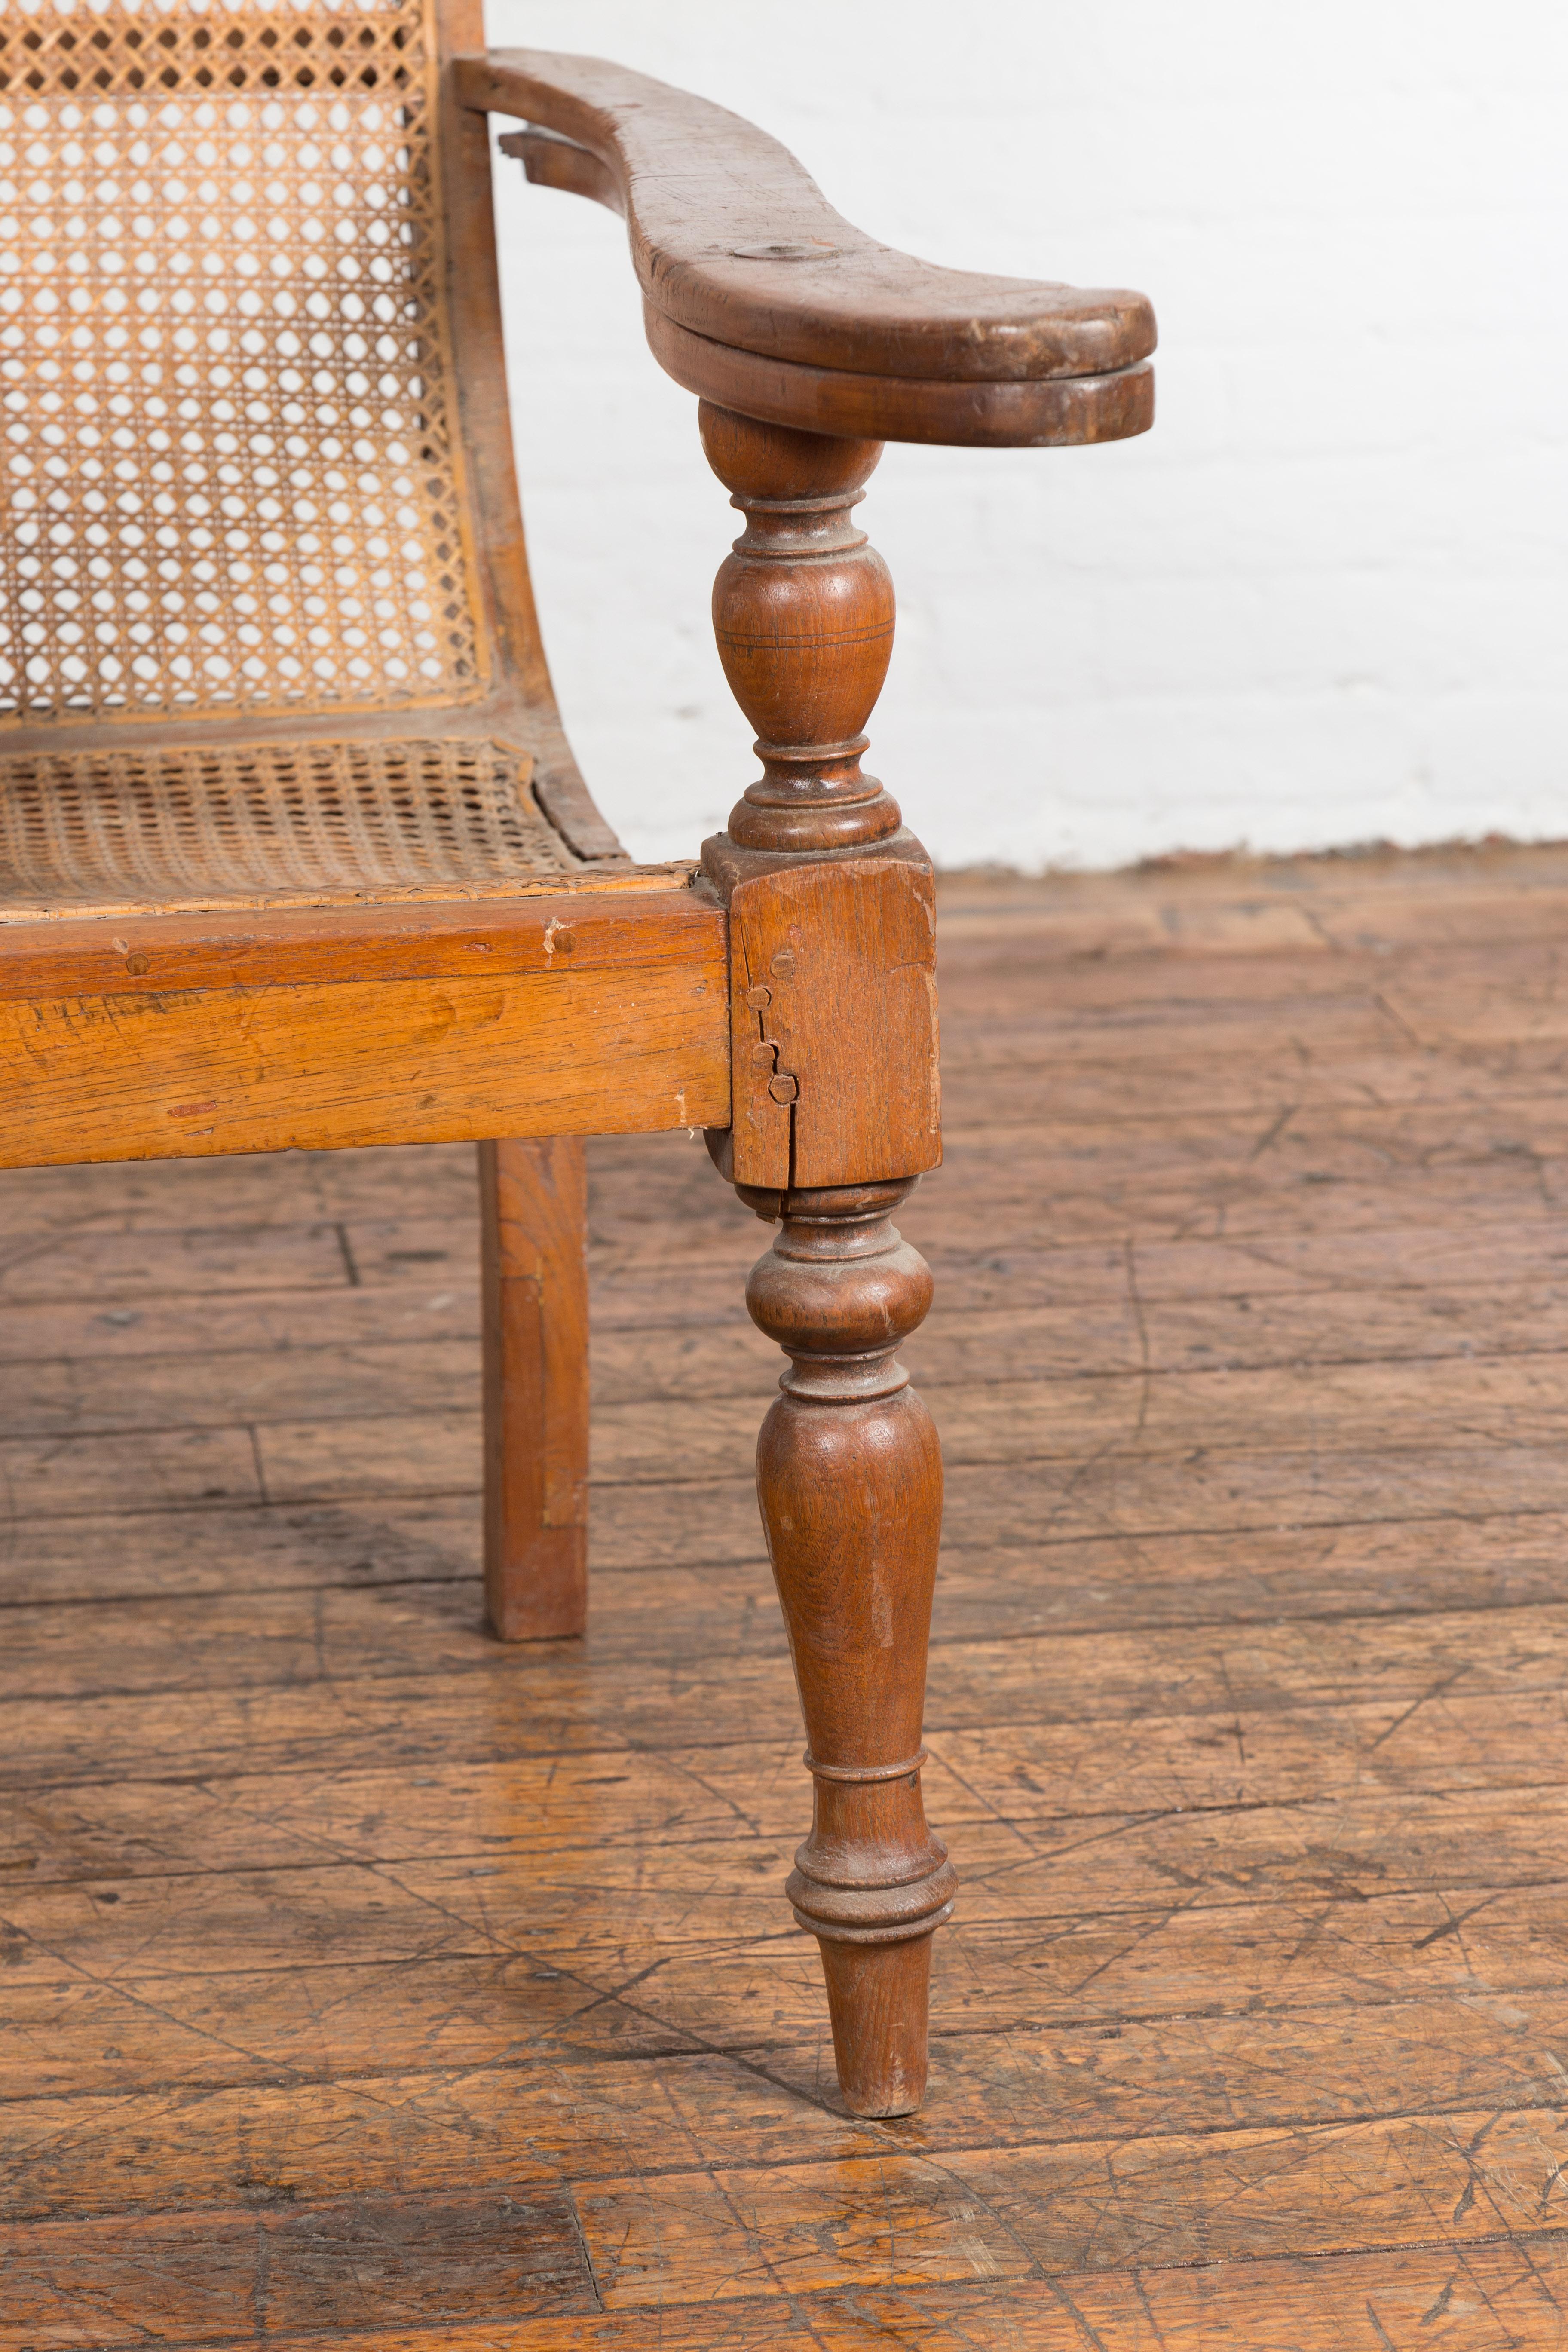 Dutch Colonial Indonesian Cane and Wood Plantation Chair with Extending Arms For Sale 7